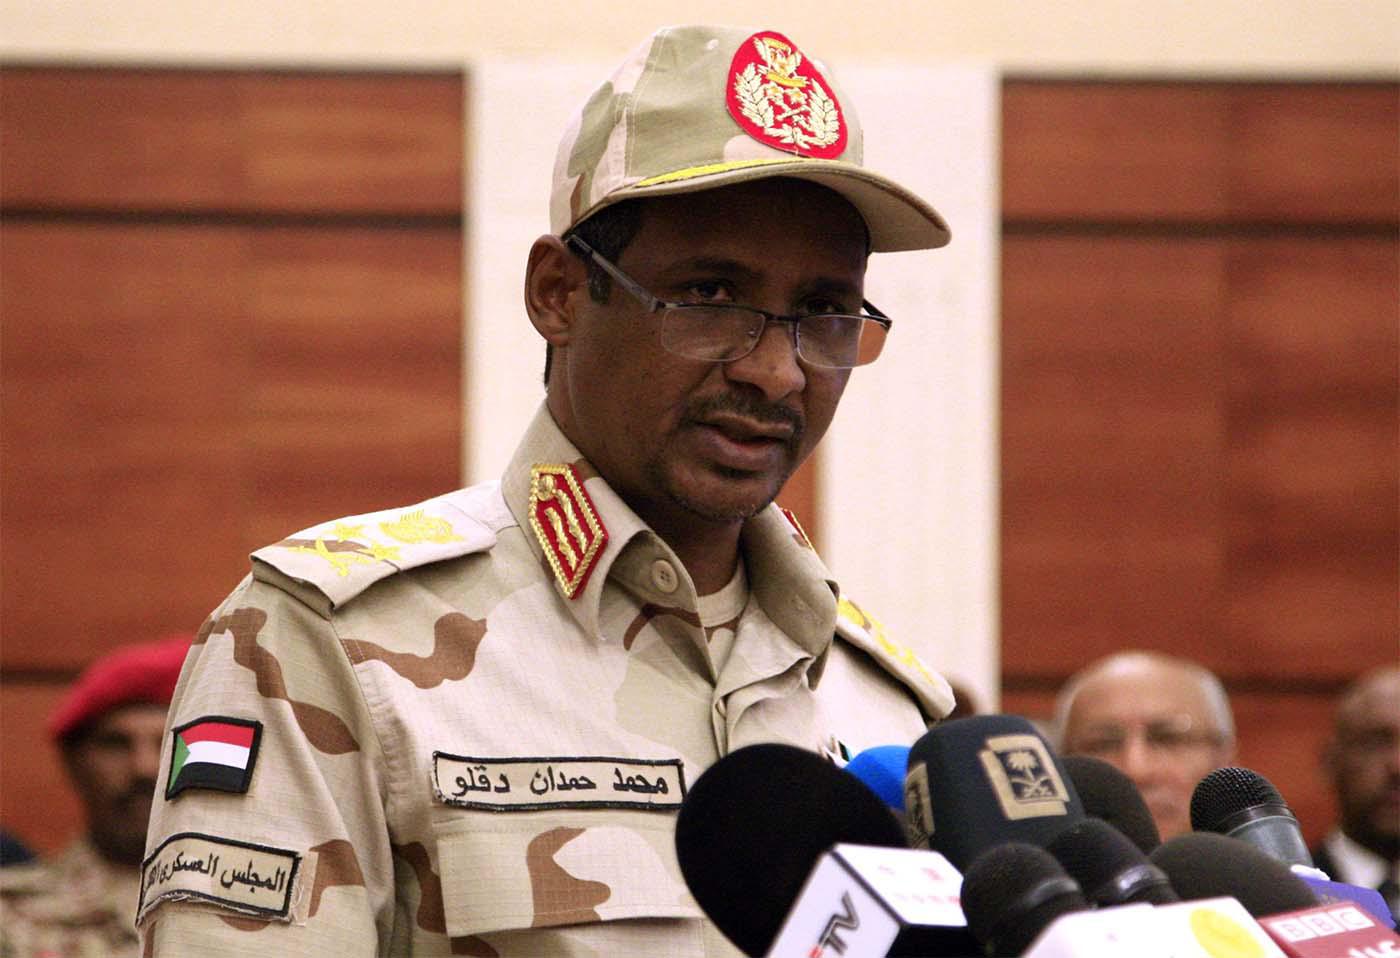 Sudan's ruling military council said last month it had thwarted more than one coup attempt